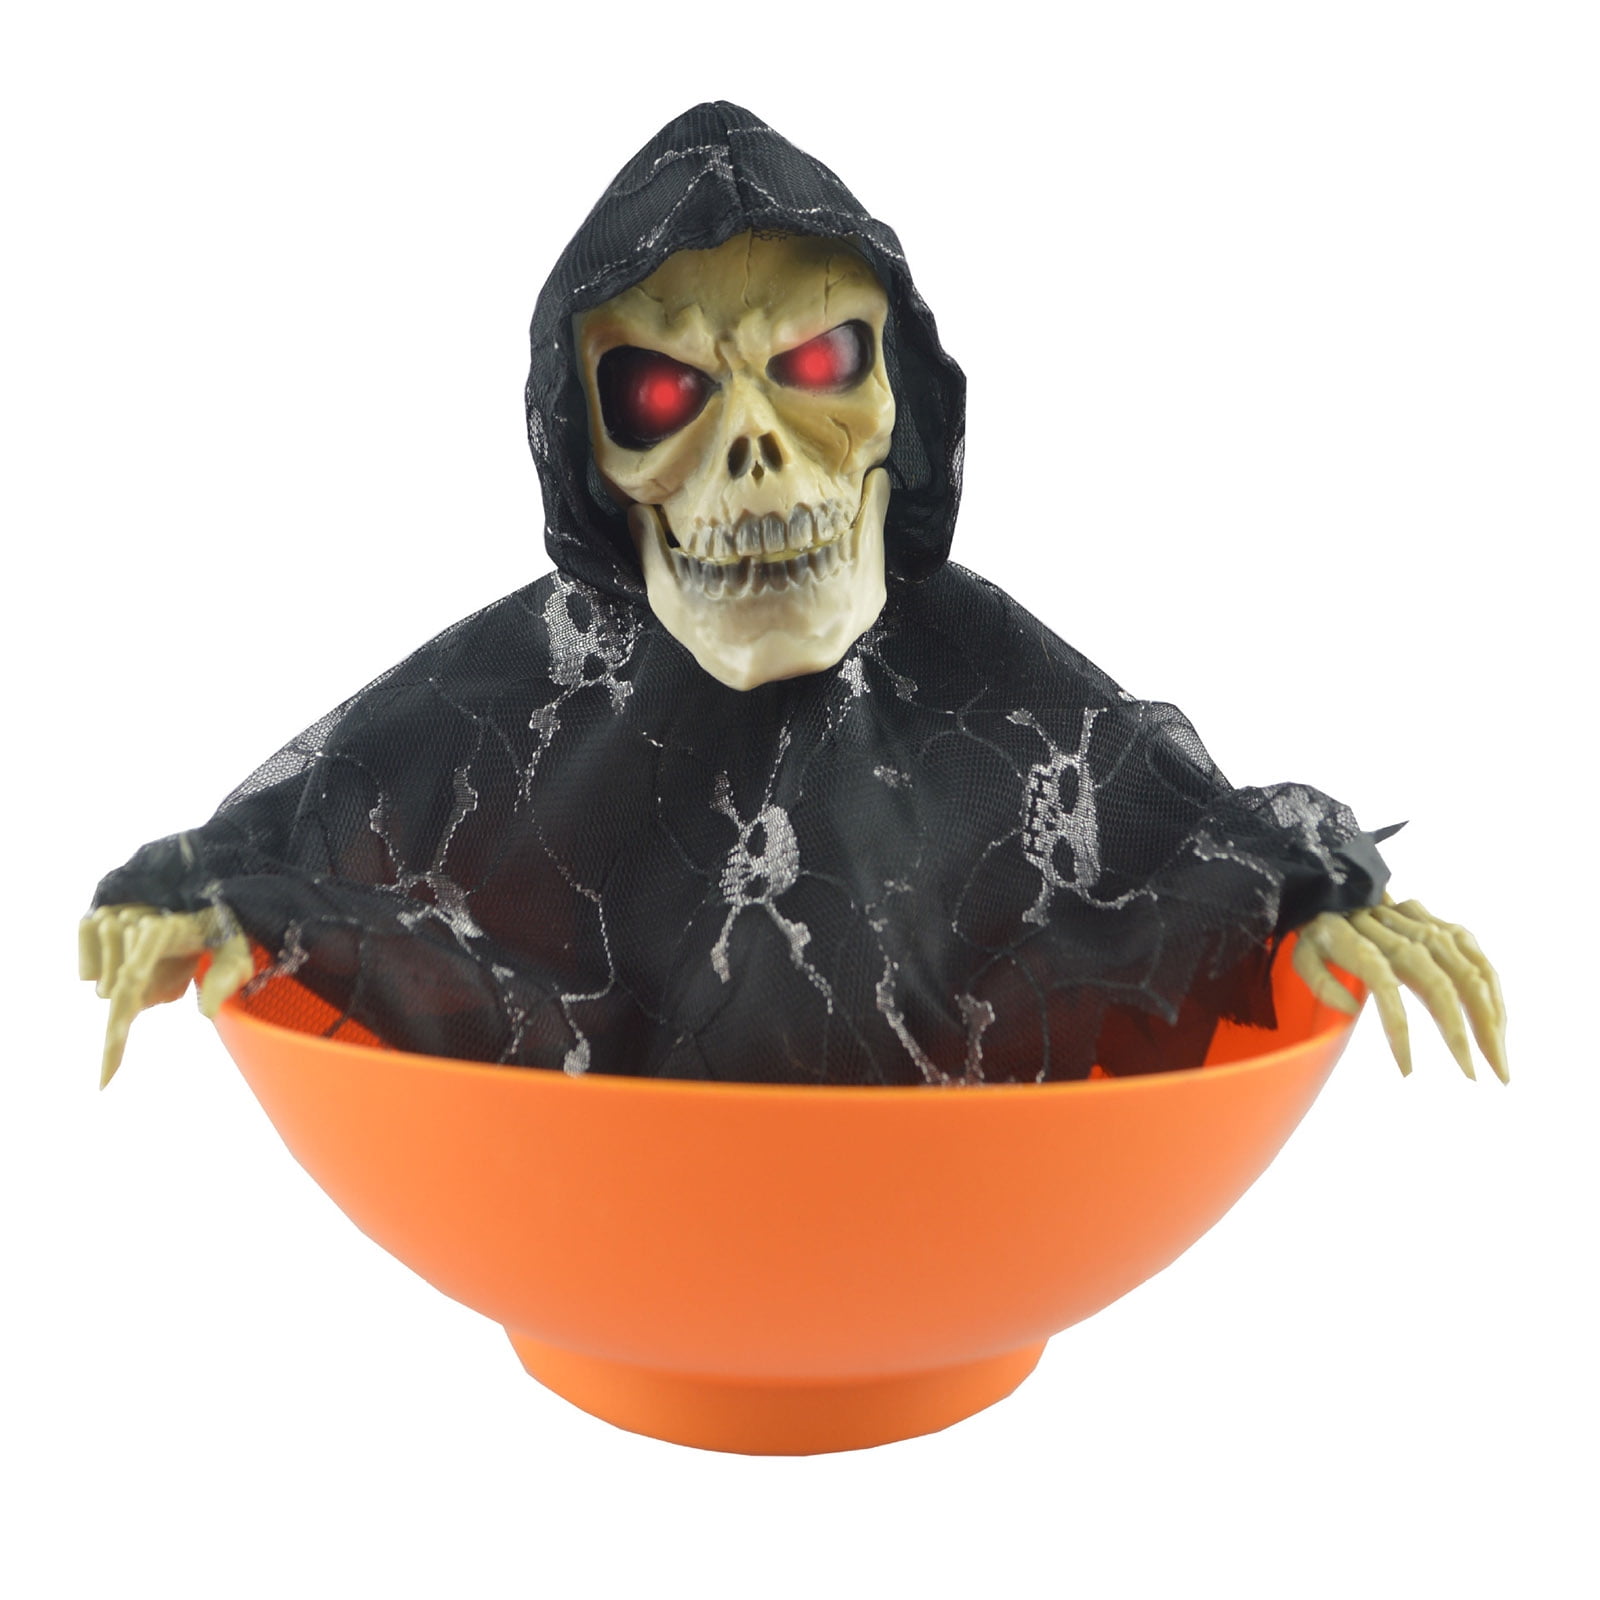 Halloween Skull Bowl Halloween Skull Candy Bowl Halloween Skull Candy Tray Halloween Bowls for Candy Skull Serving Tray Halloween Candy Bowl and Tray Set with 6 Vintage Halloween Wine Labels 